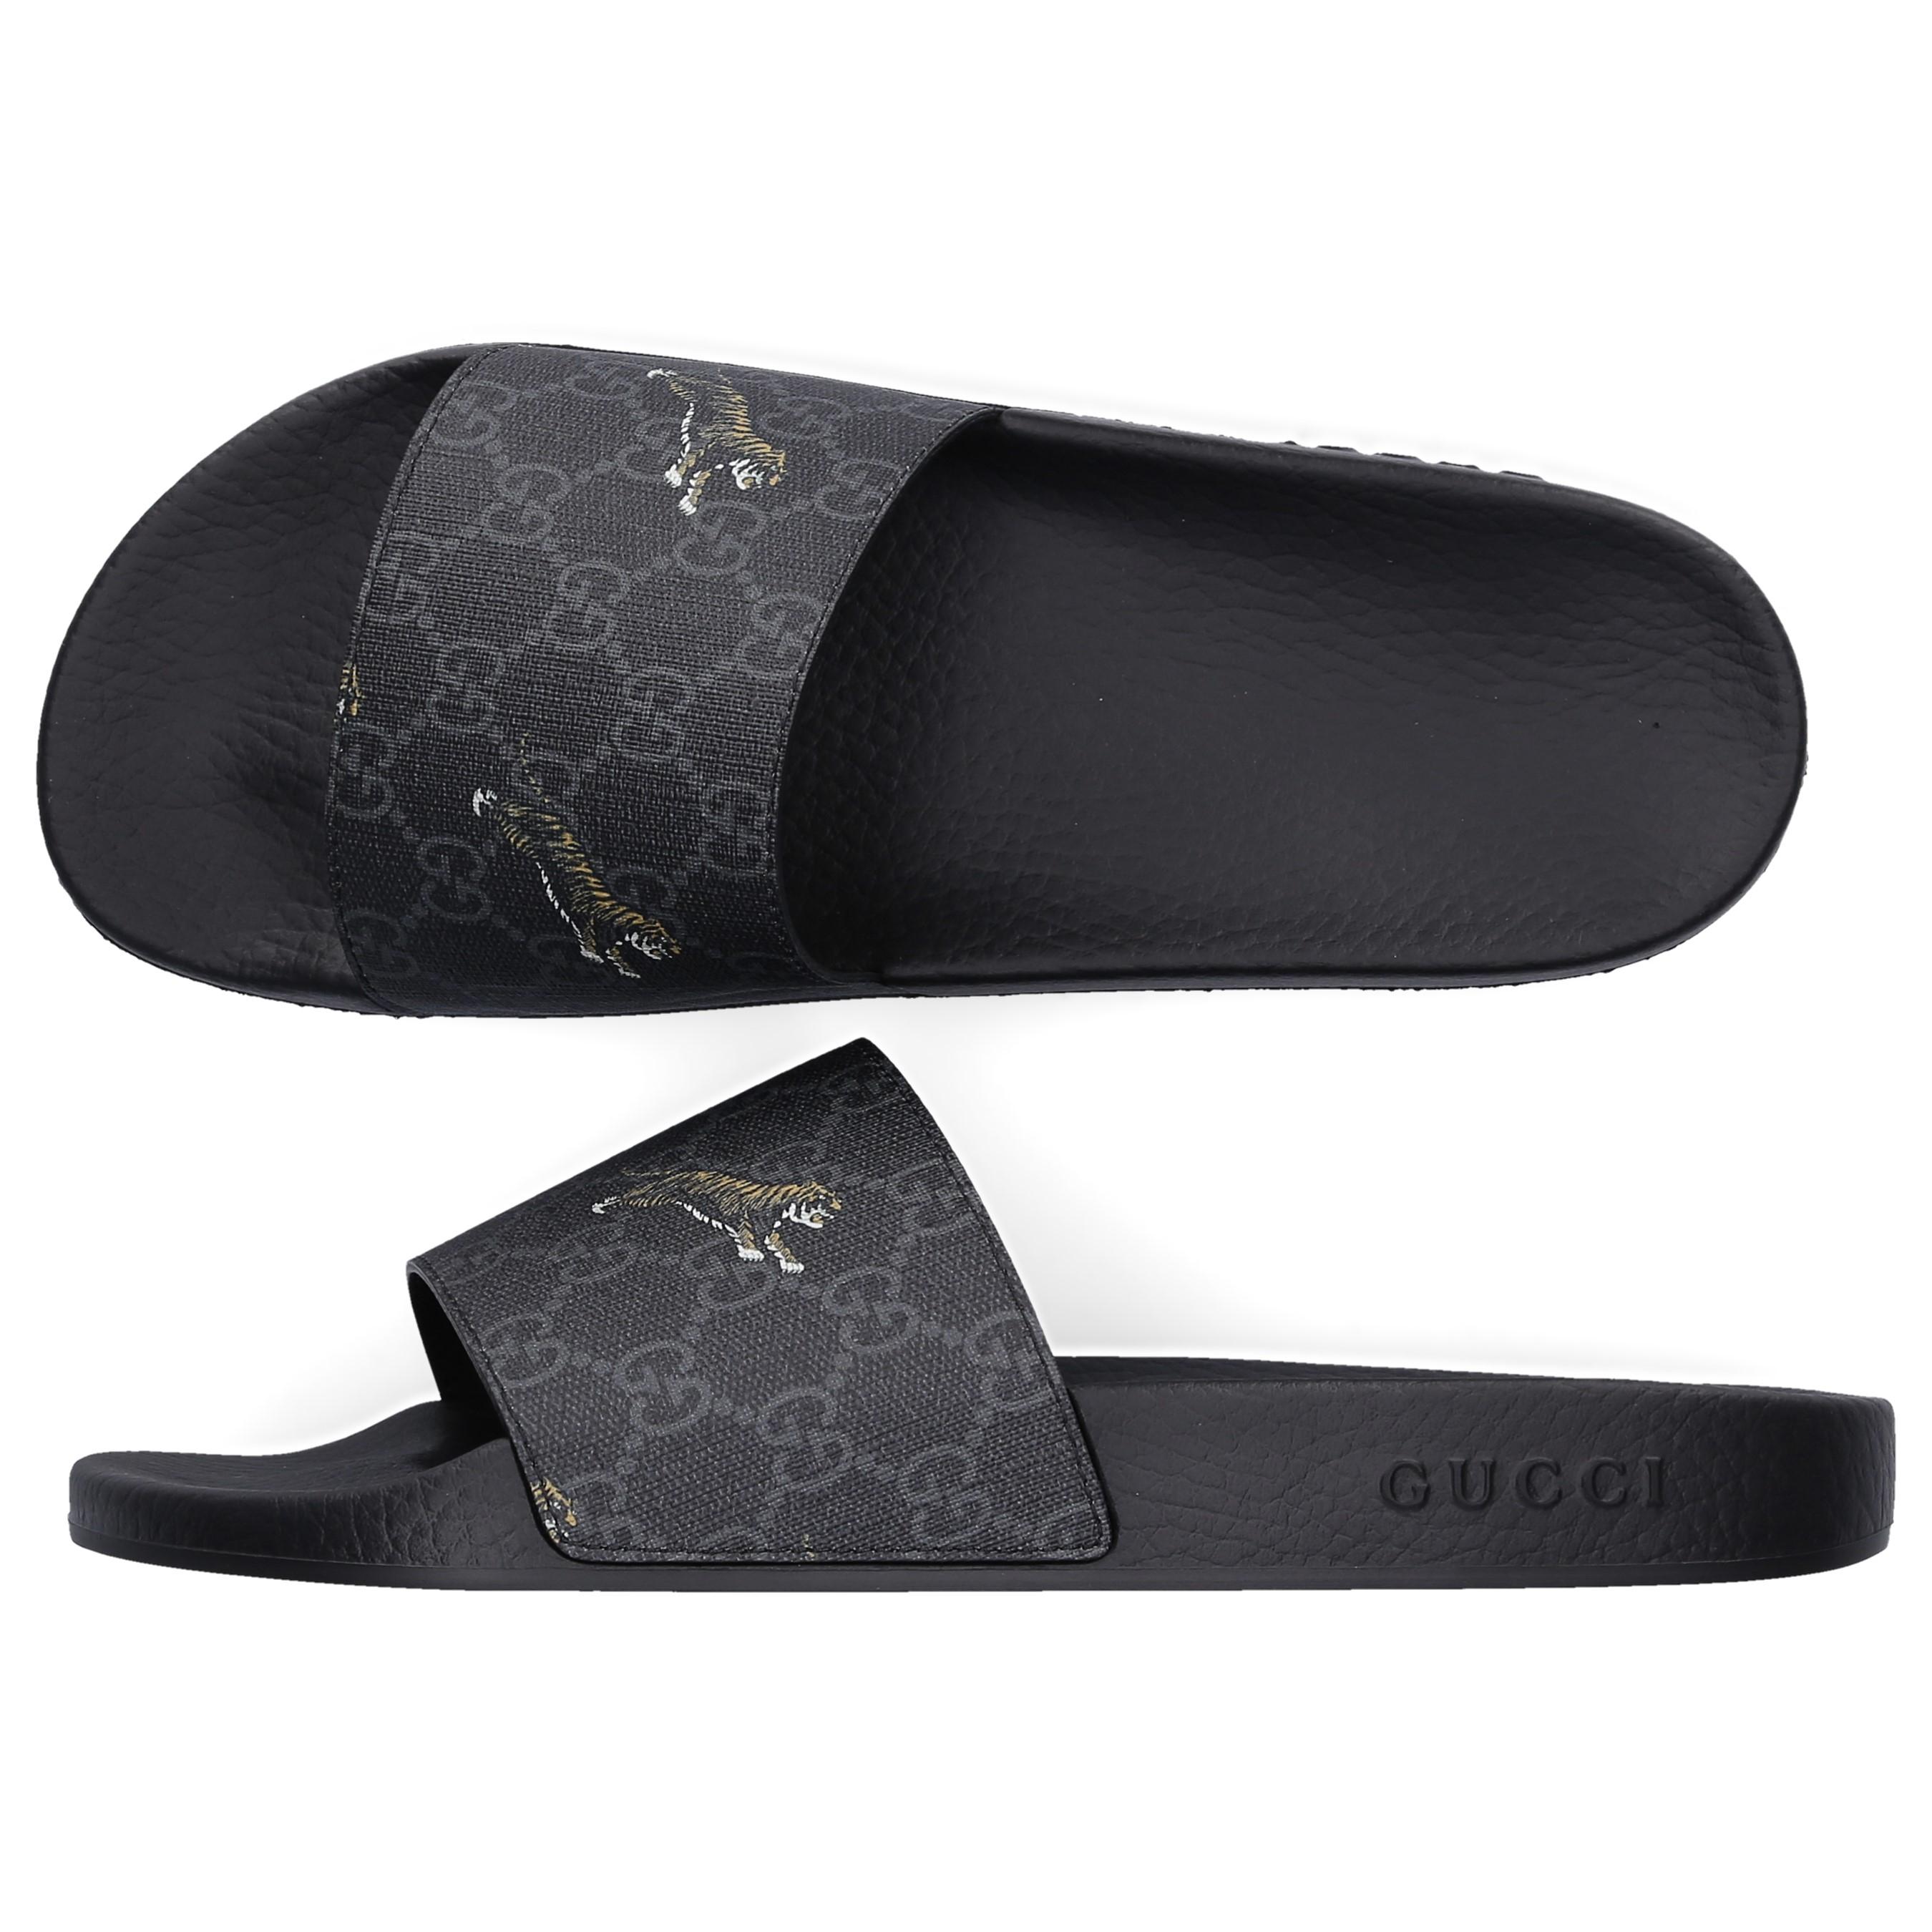 Gucci Beach Sandals Tigers Print in Gray for Men - Lyst